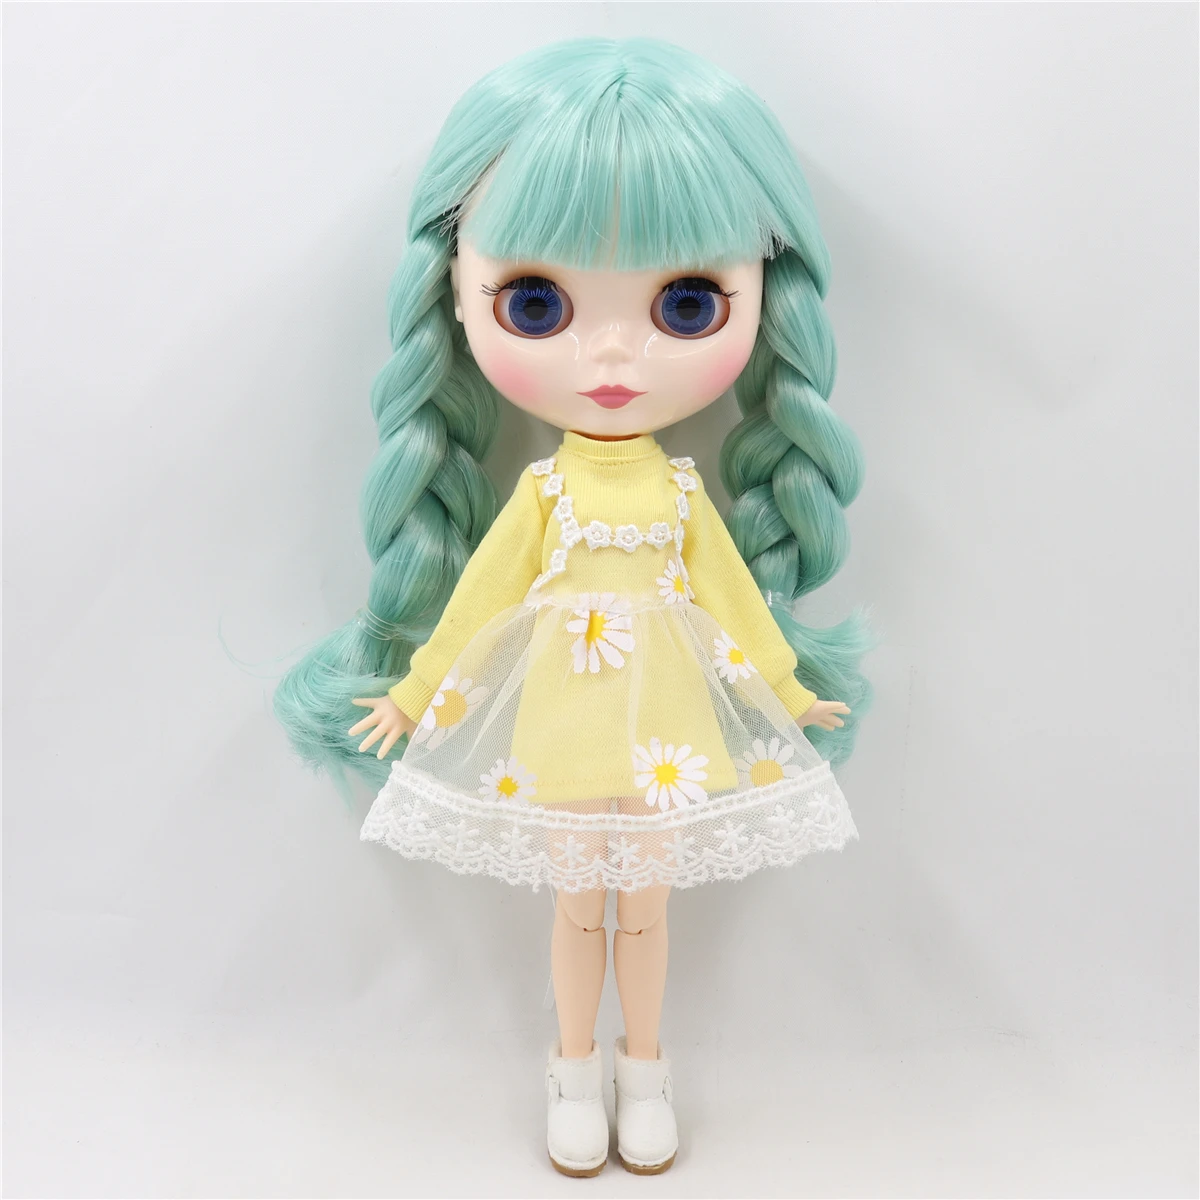 Neo Blythe Doll with Mint Hair, White Skin, Shiny Face & Jointed Body 1